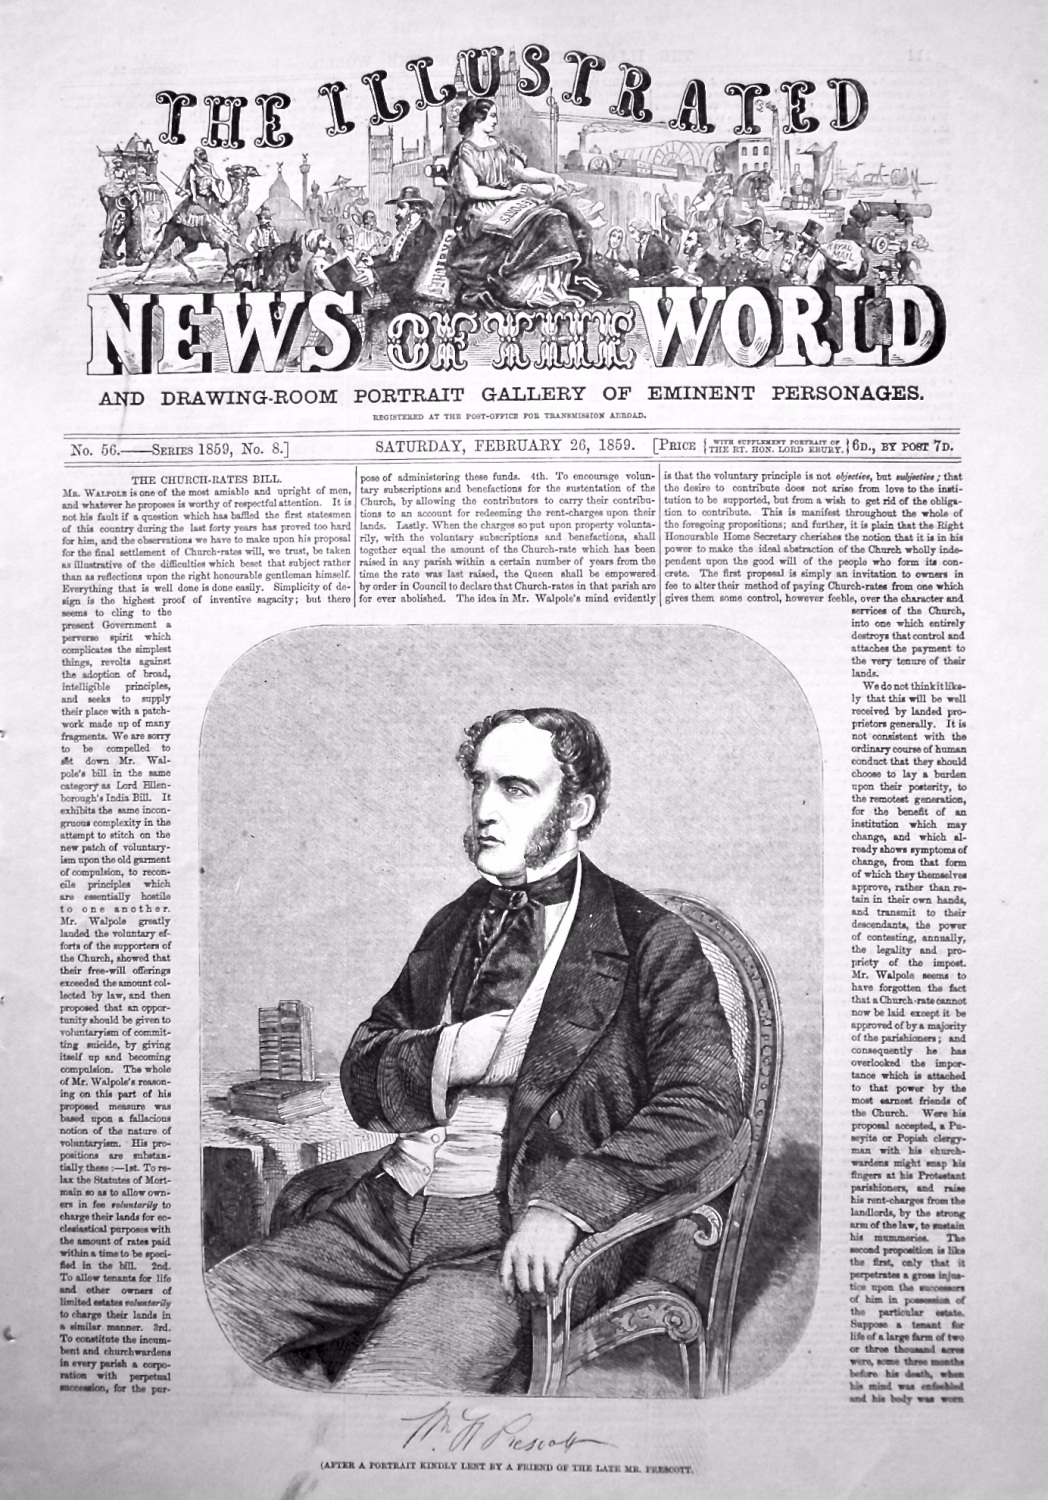 The Illustrated News of the World, February 26th, 1859.